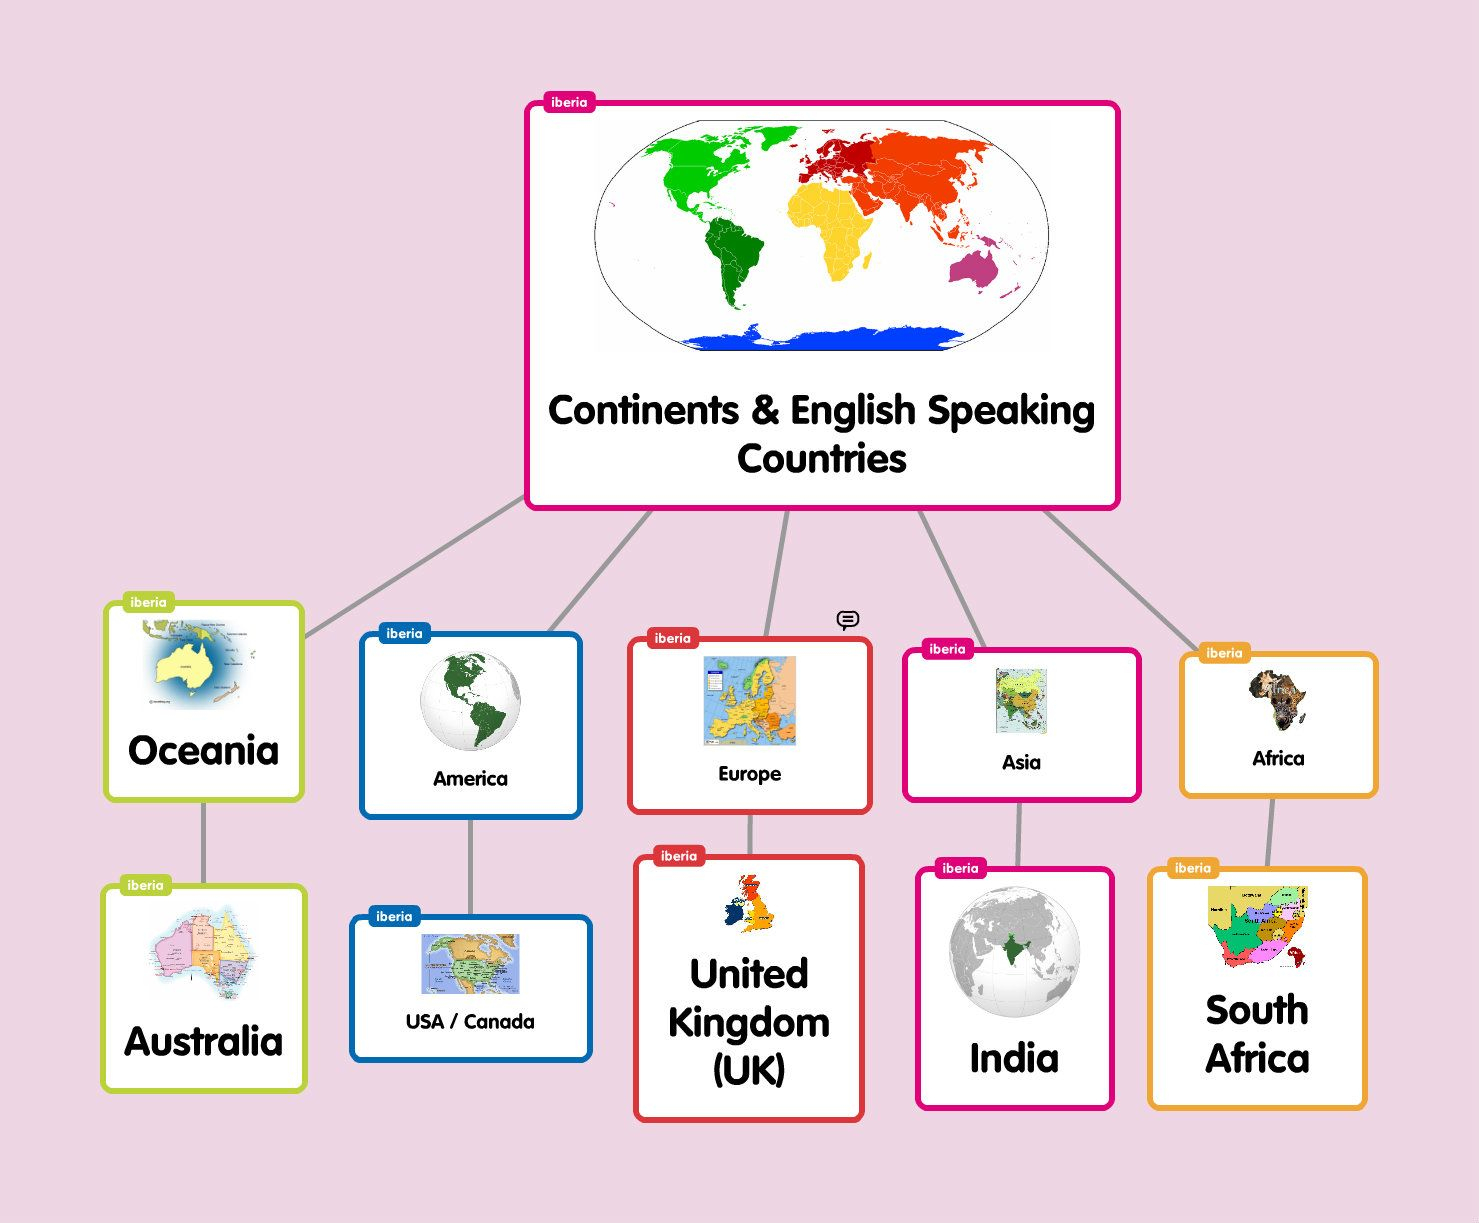 English Lesson Plan Ideas With Popplet | English Lesson